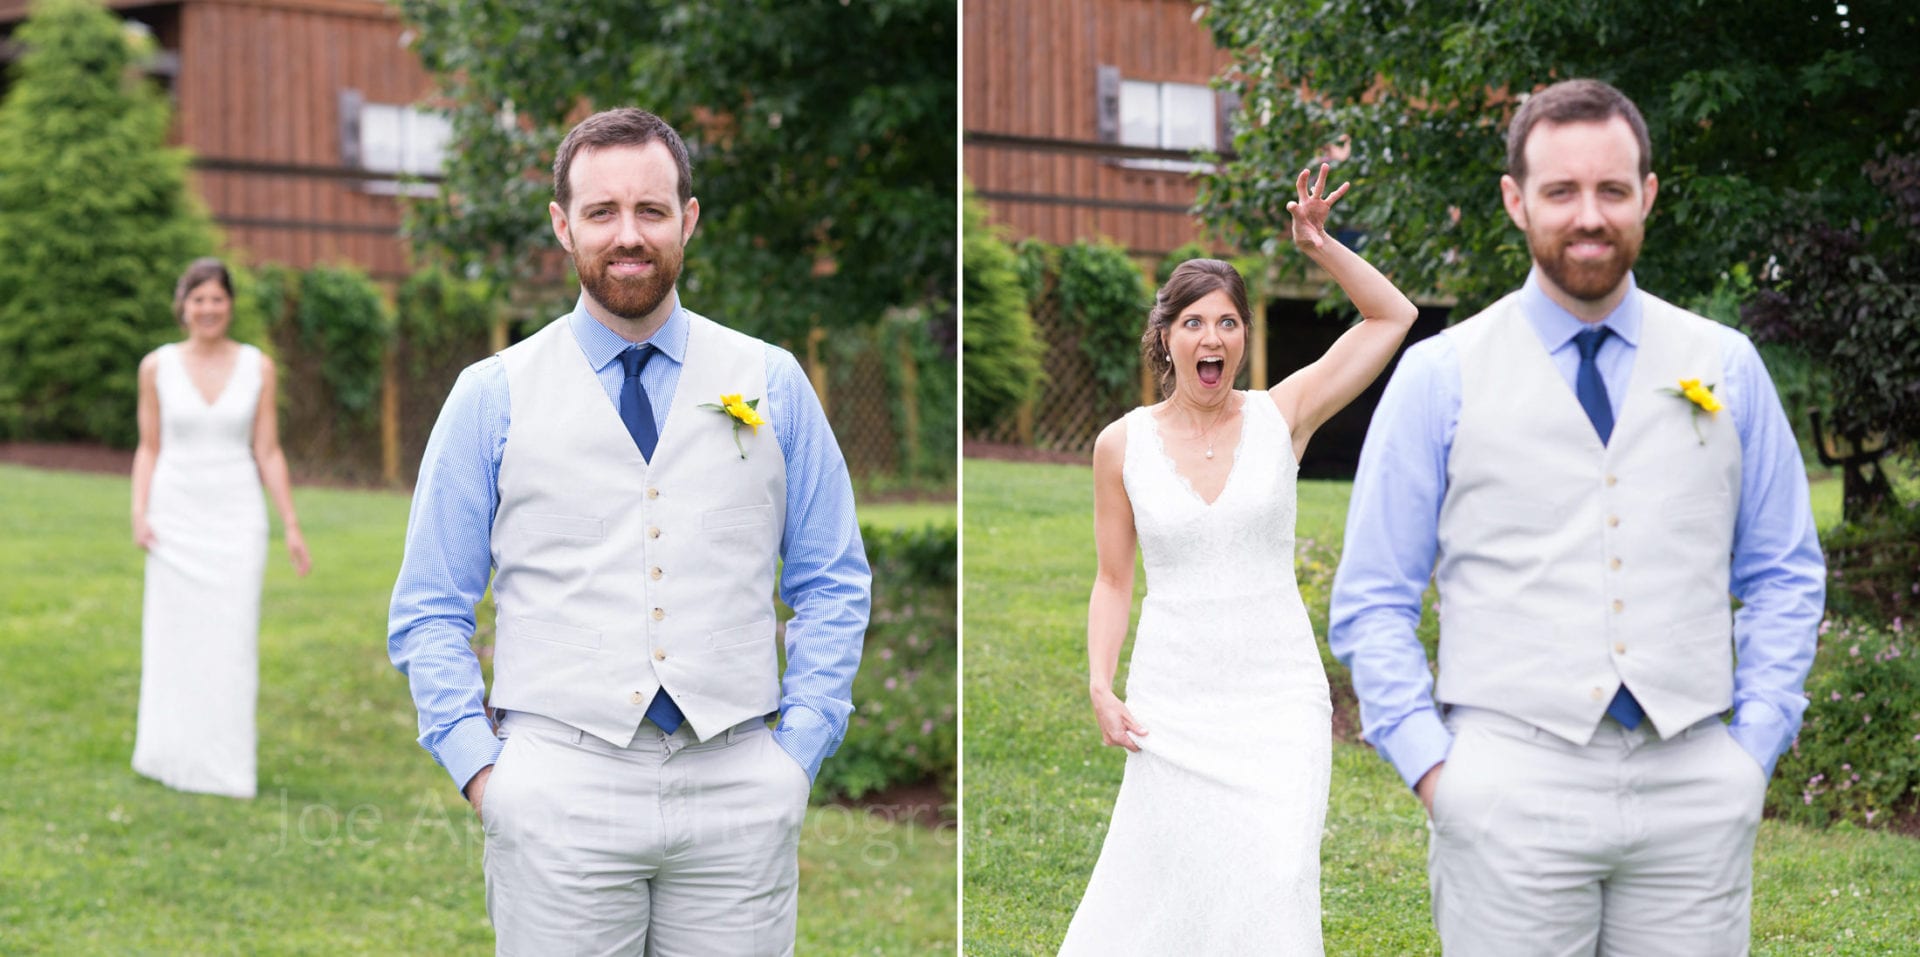 Two photos: a groom waits as his bride walks from behind for their first look before their Armstrong Farms Wedding. The second photo shows the bride raising her arm and making a funny face behind the unknowing groom.